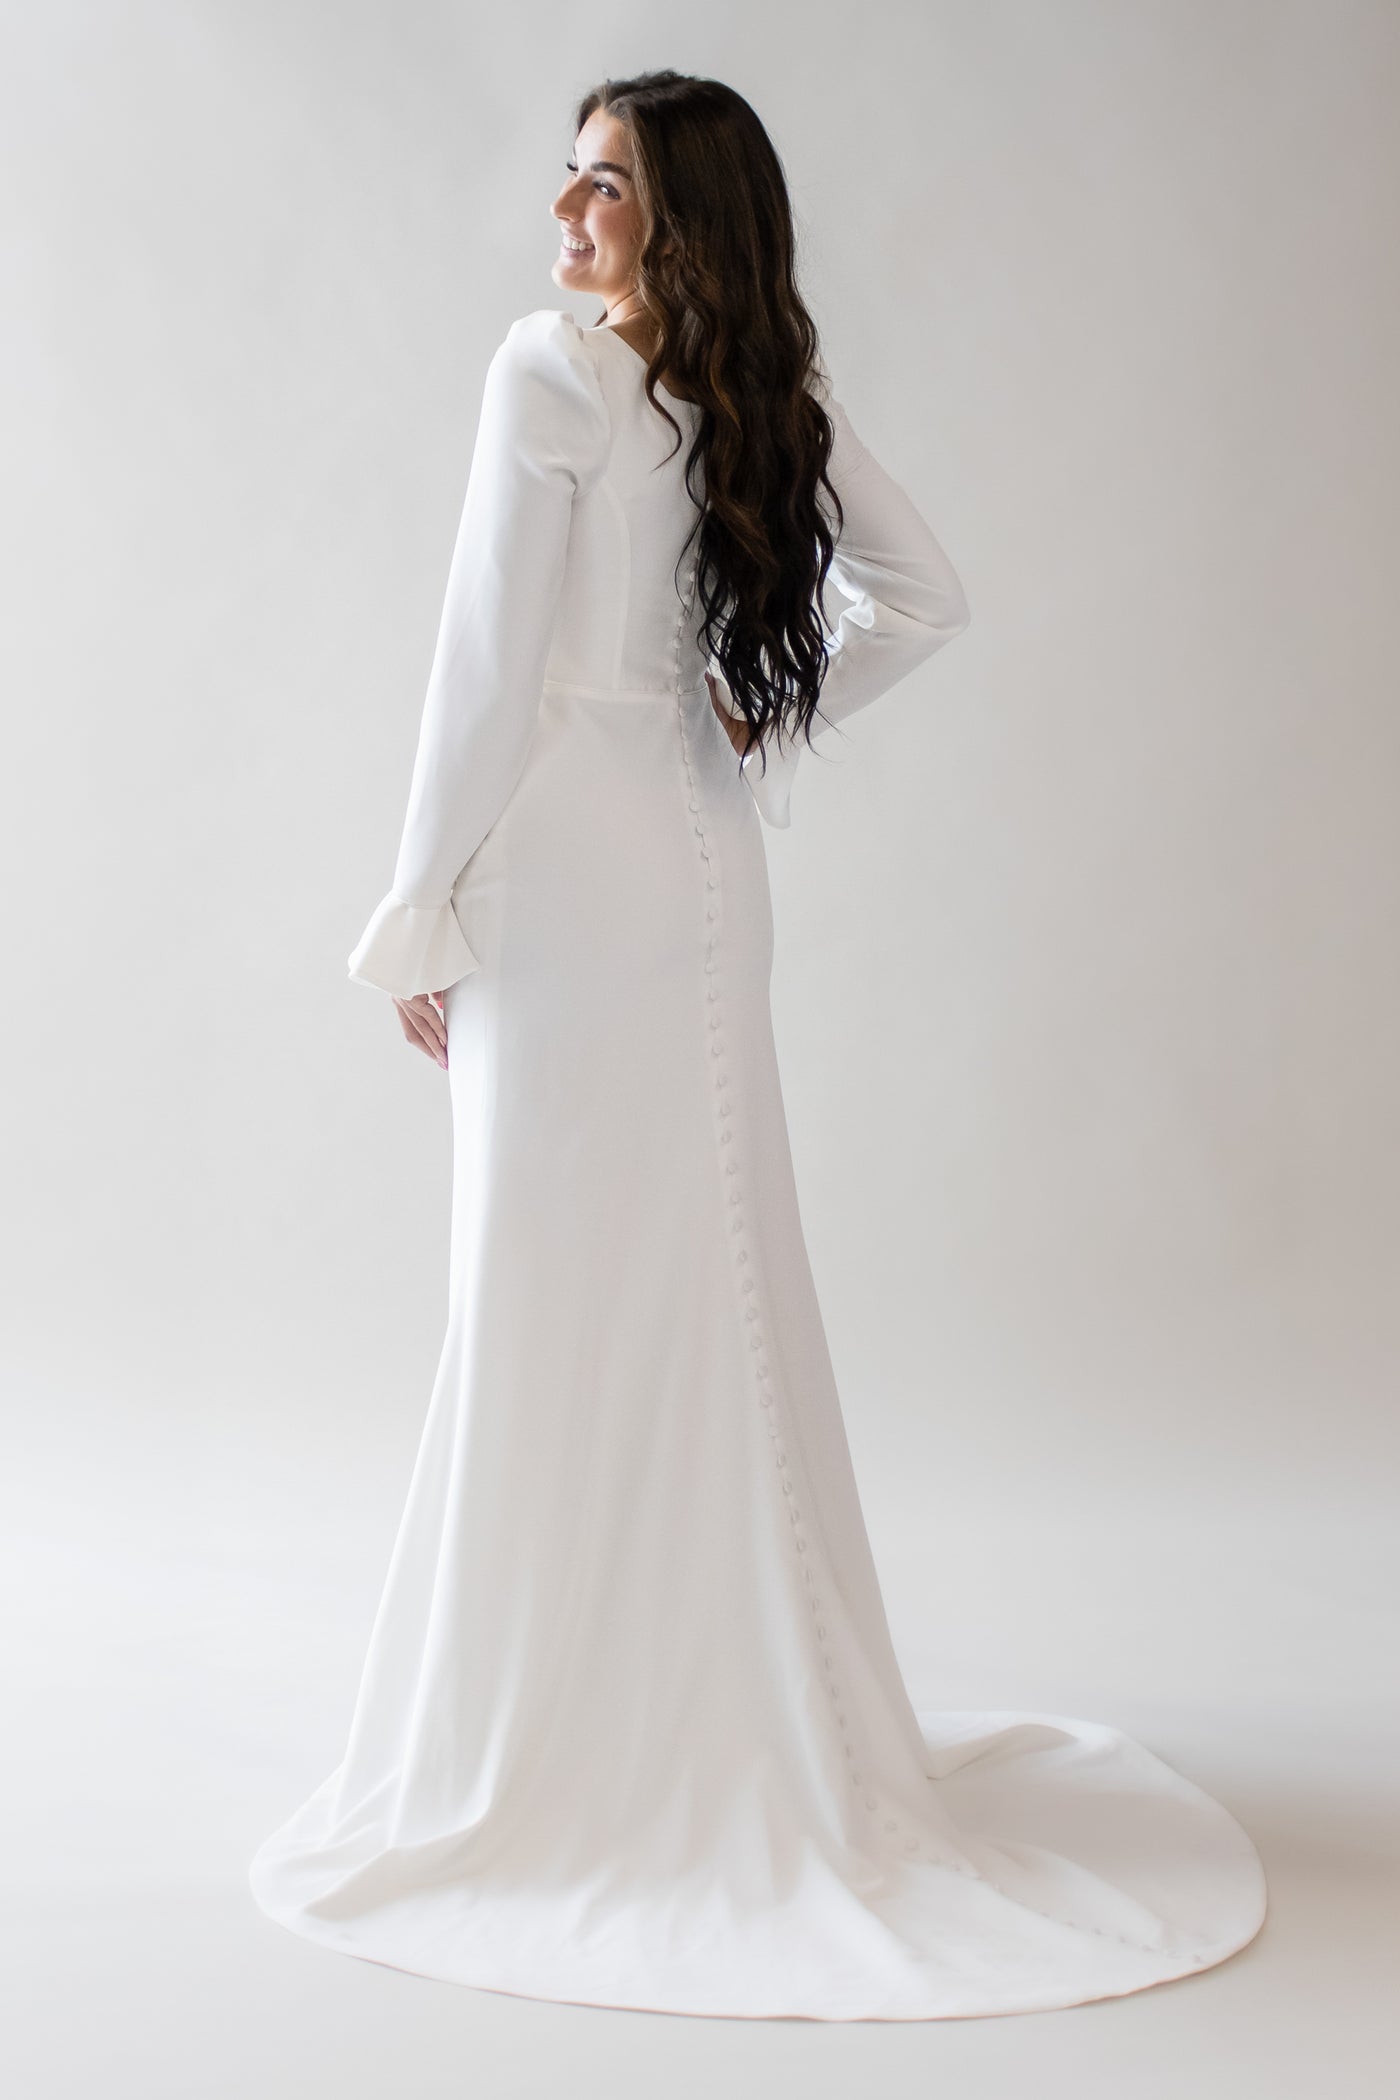 This is the back of a modest wedding gown with buttons along the entire back and a fitted silhouette.